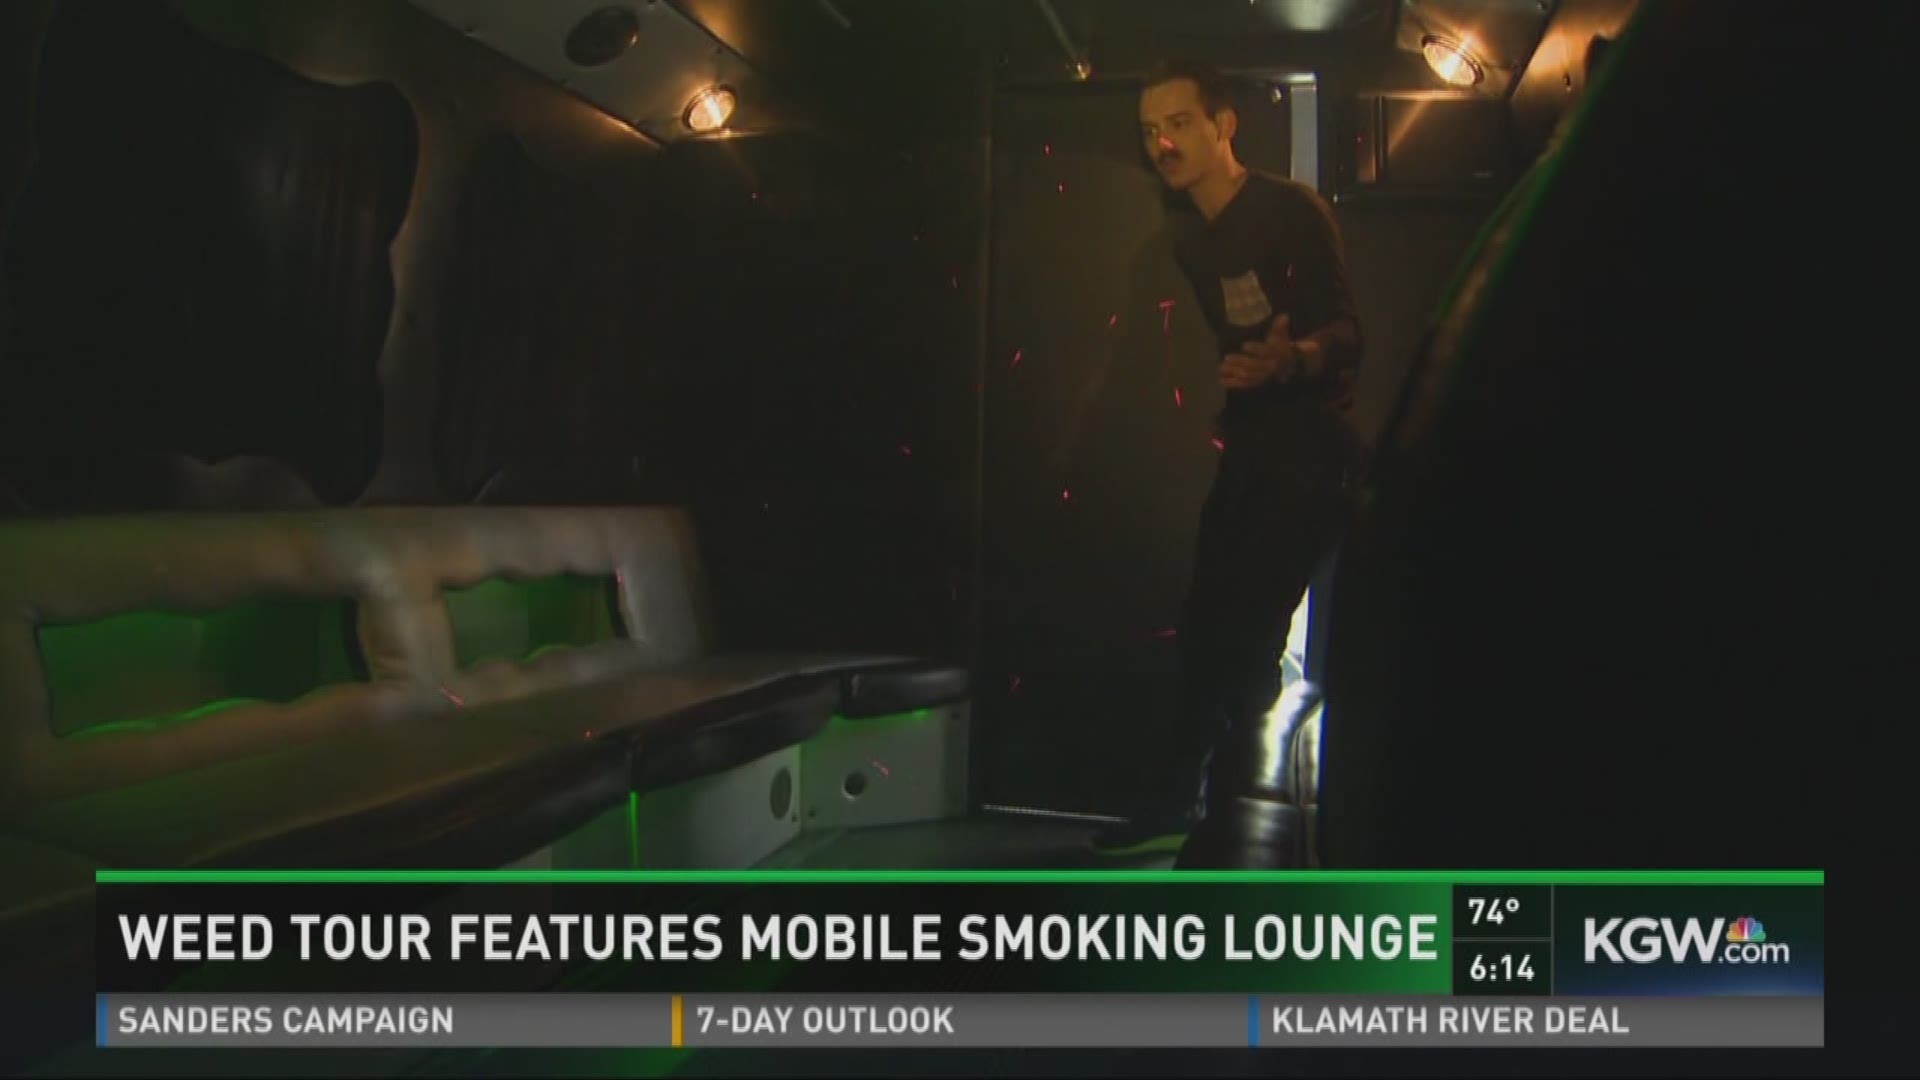 Bridgetown weed tour includes mobile lounge